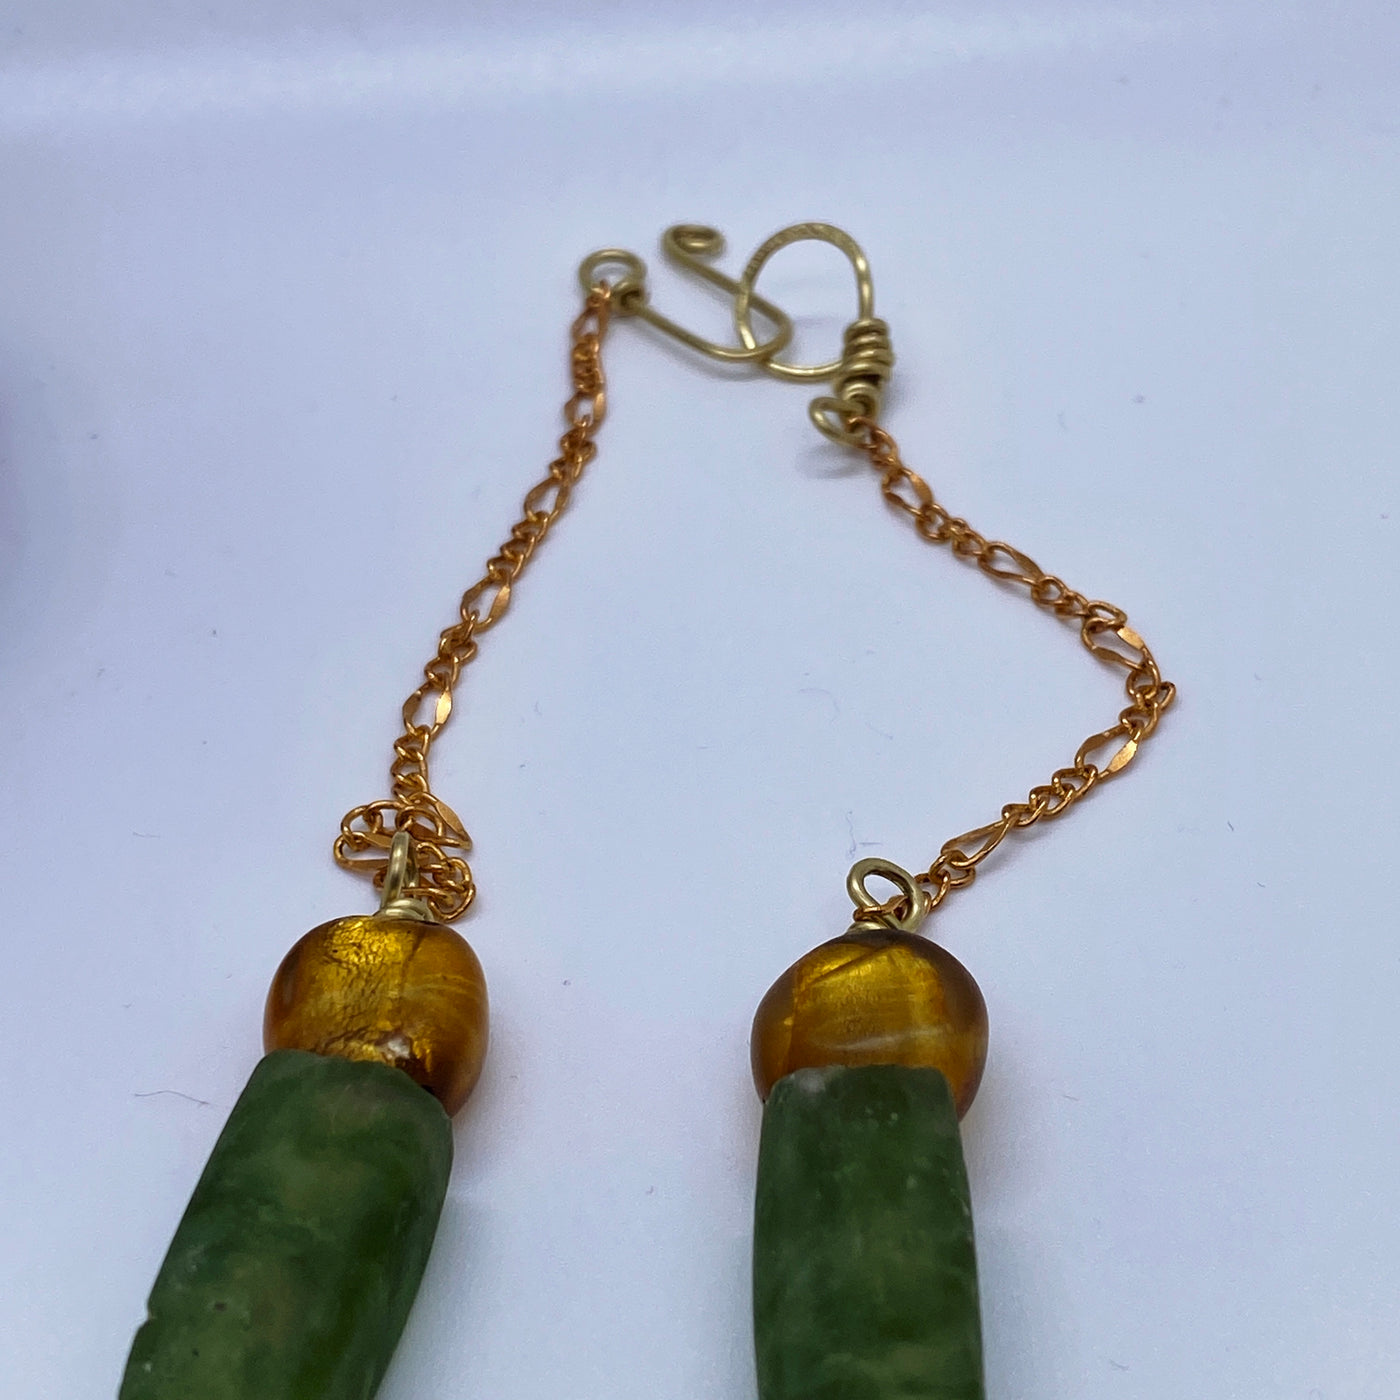 Golden and green glass on chain